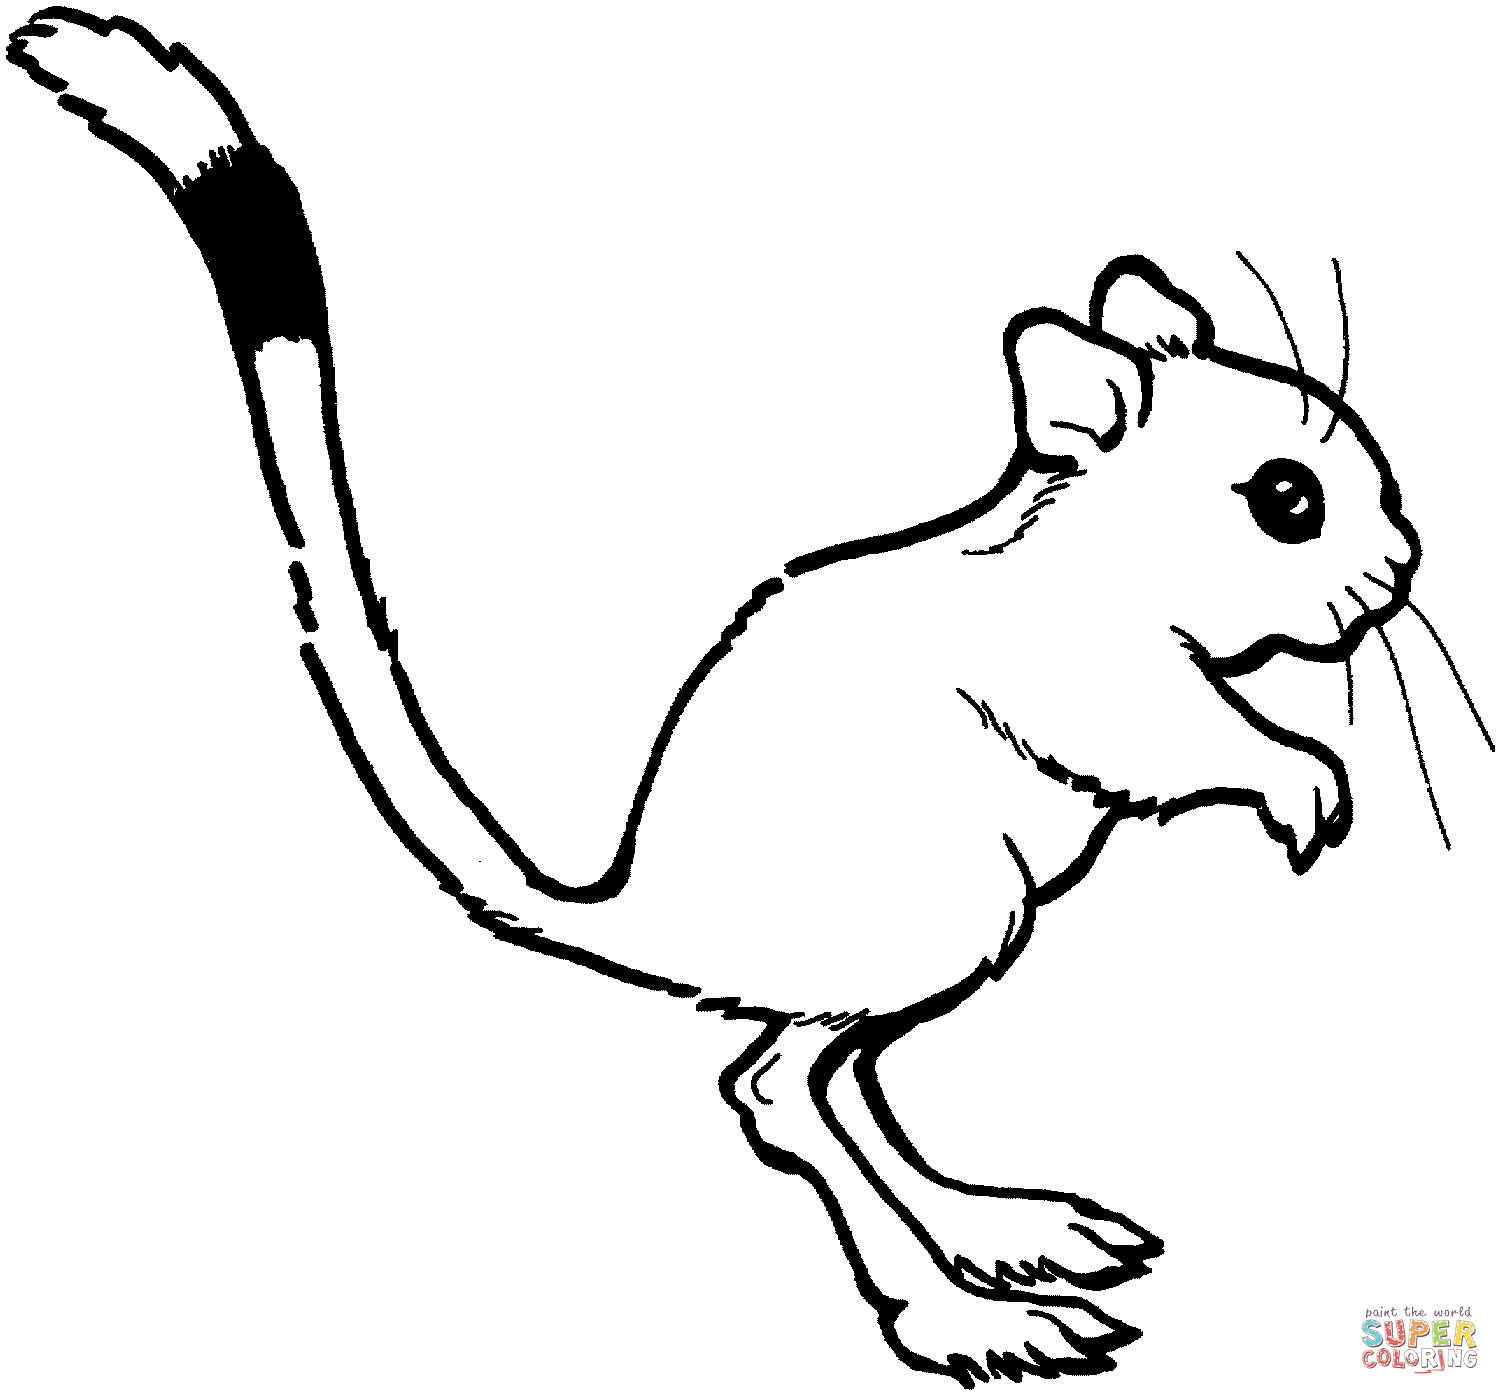 Rats coloring pages | Free Coloring Pages